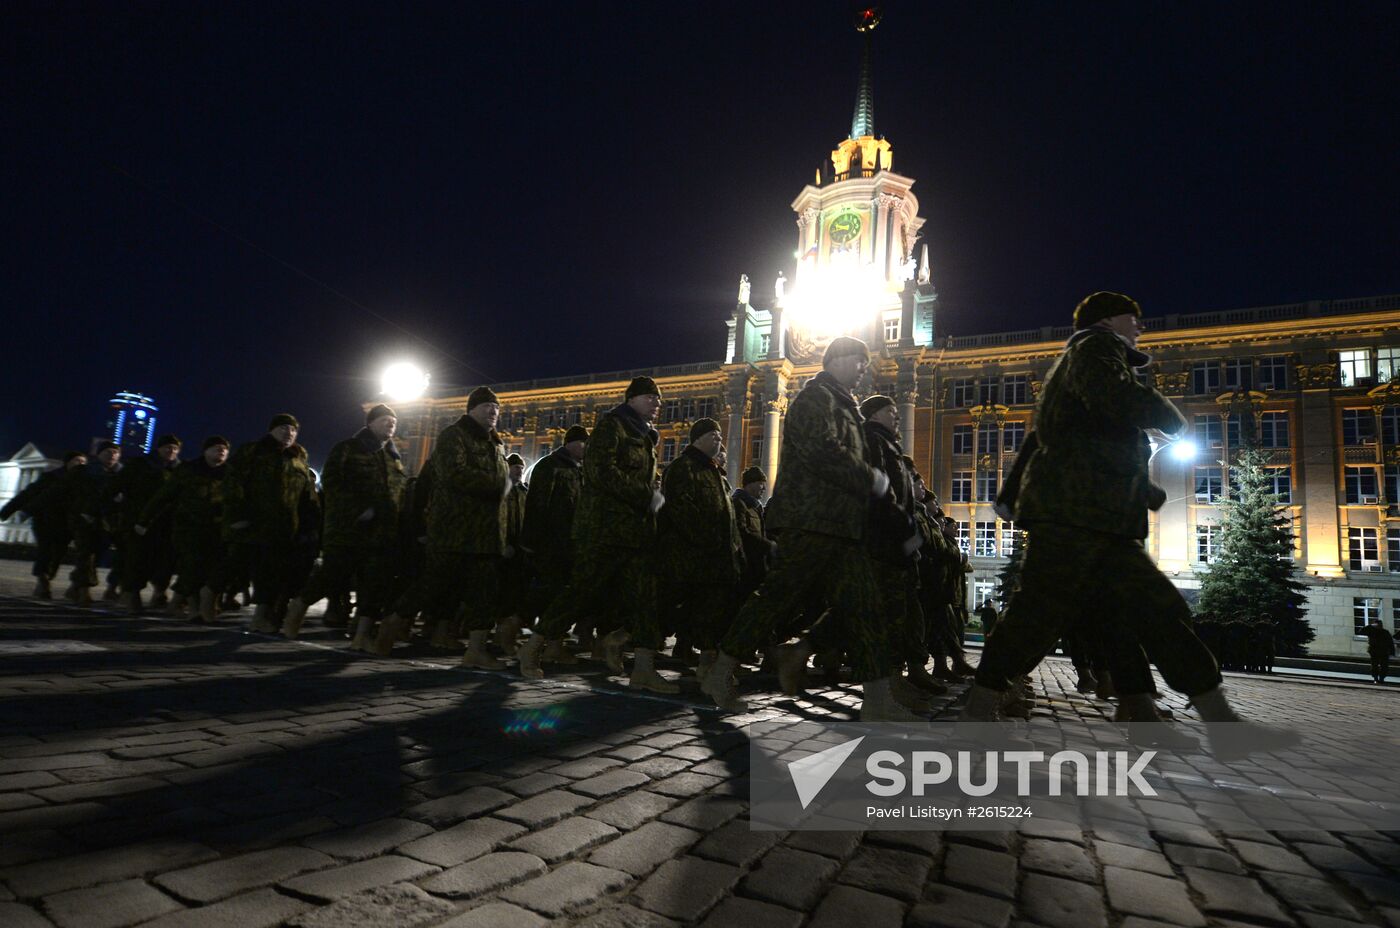 Victory Day parade rehearsal in Yekaterinburg